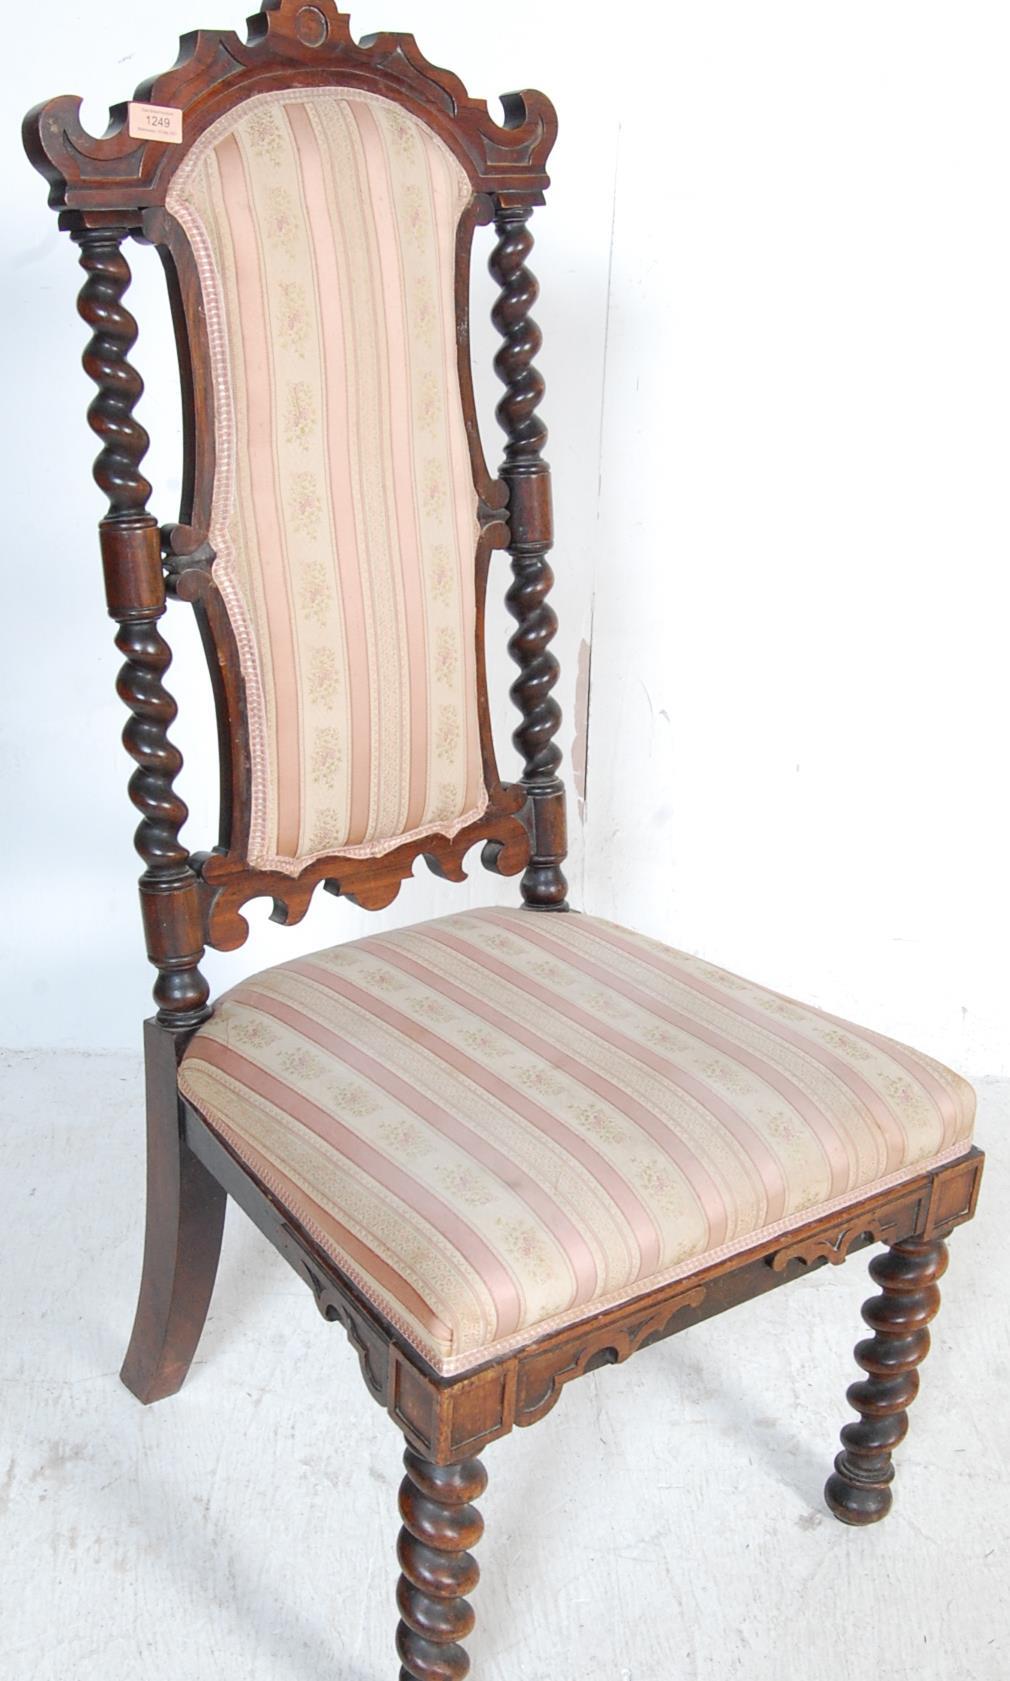 19TH CENTURY VICTORIAN ANTIQUE ROSEWOOD BEDROOM CHAIR - Image 2 of 5